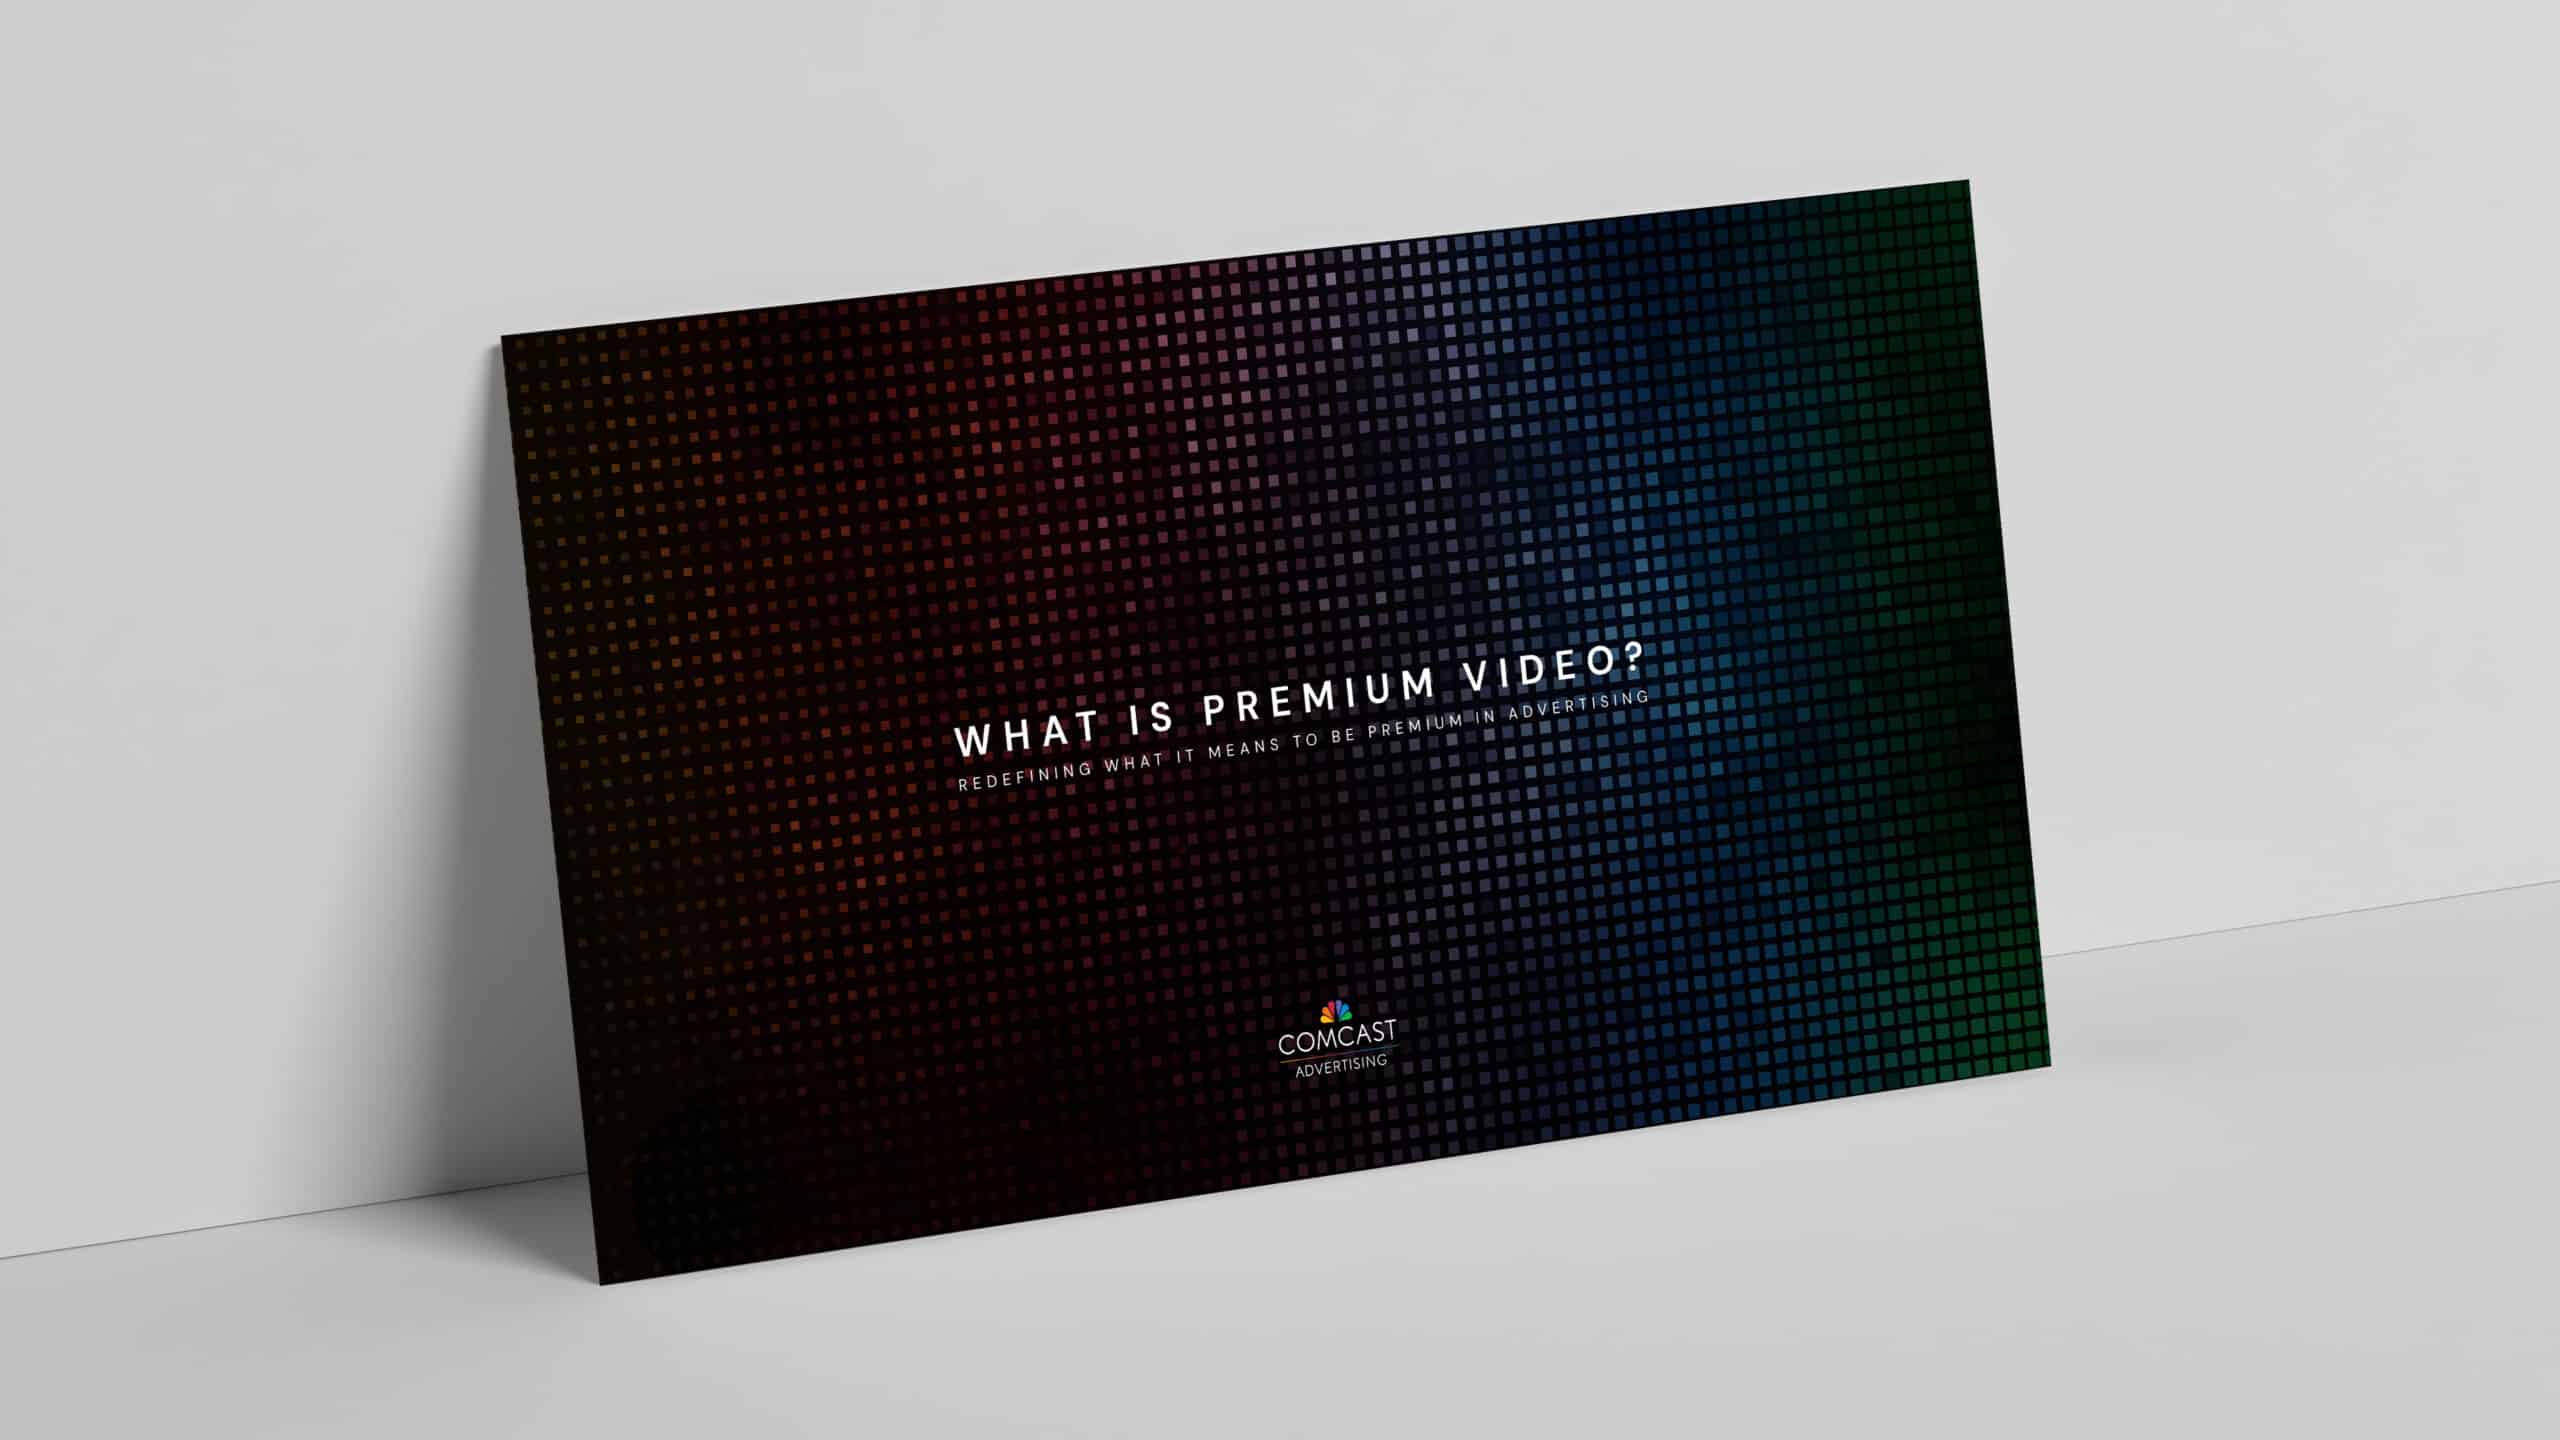 Redefining What it Means to be “Premium” in Advertising